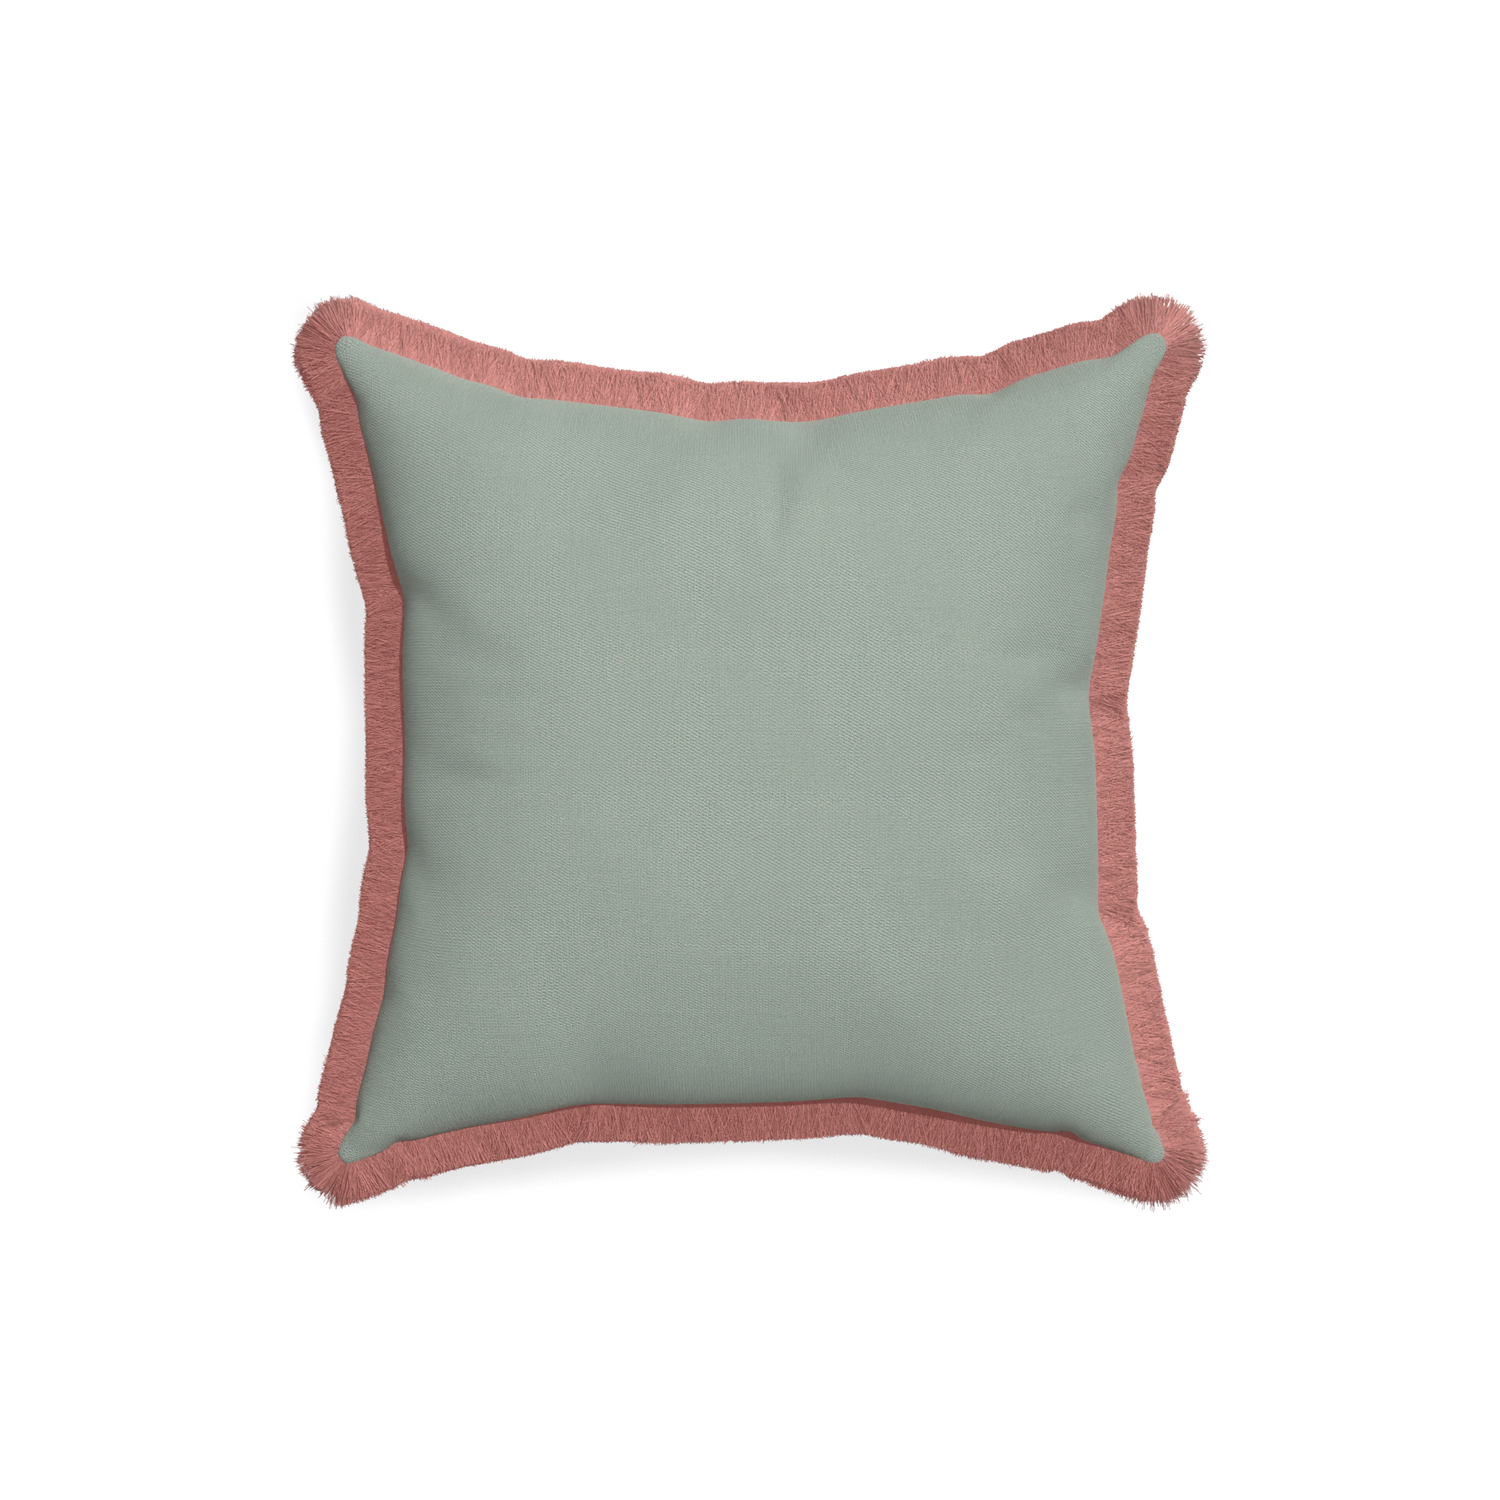 18-square sage custom sage green cottonpillow with d fringe on white background